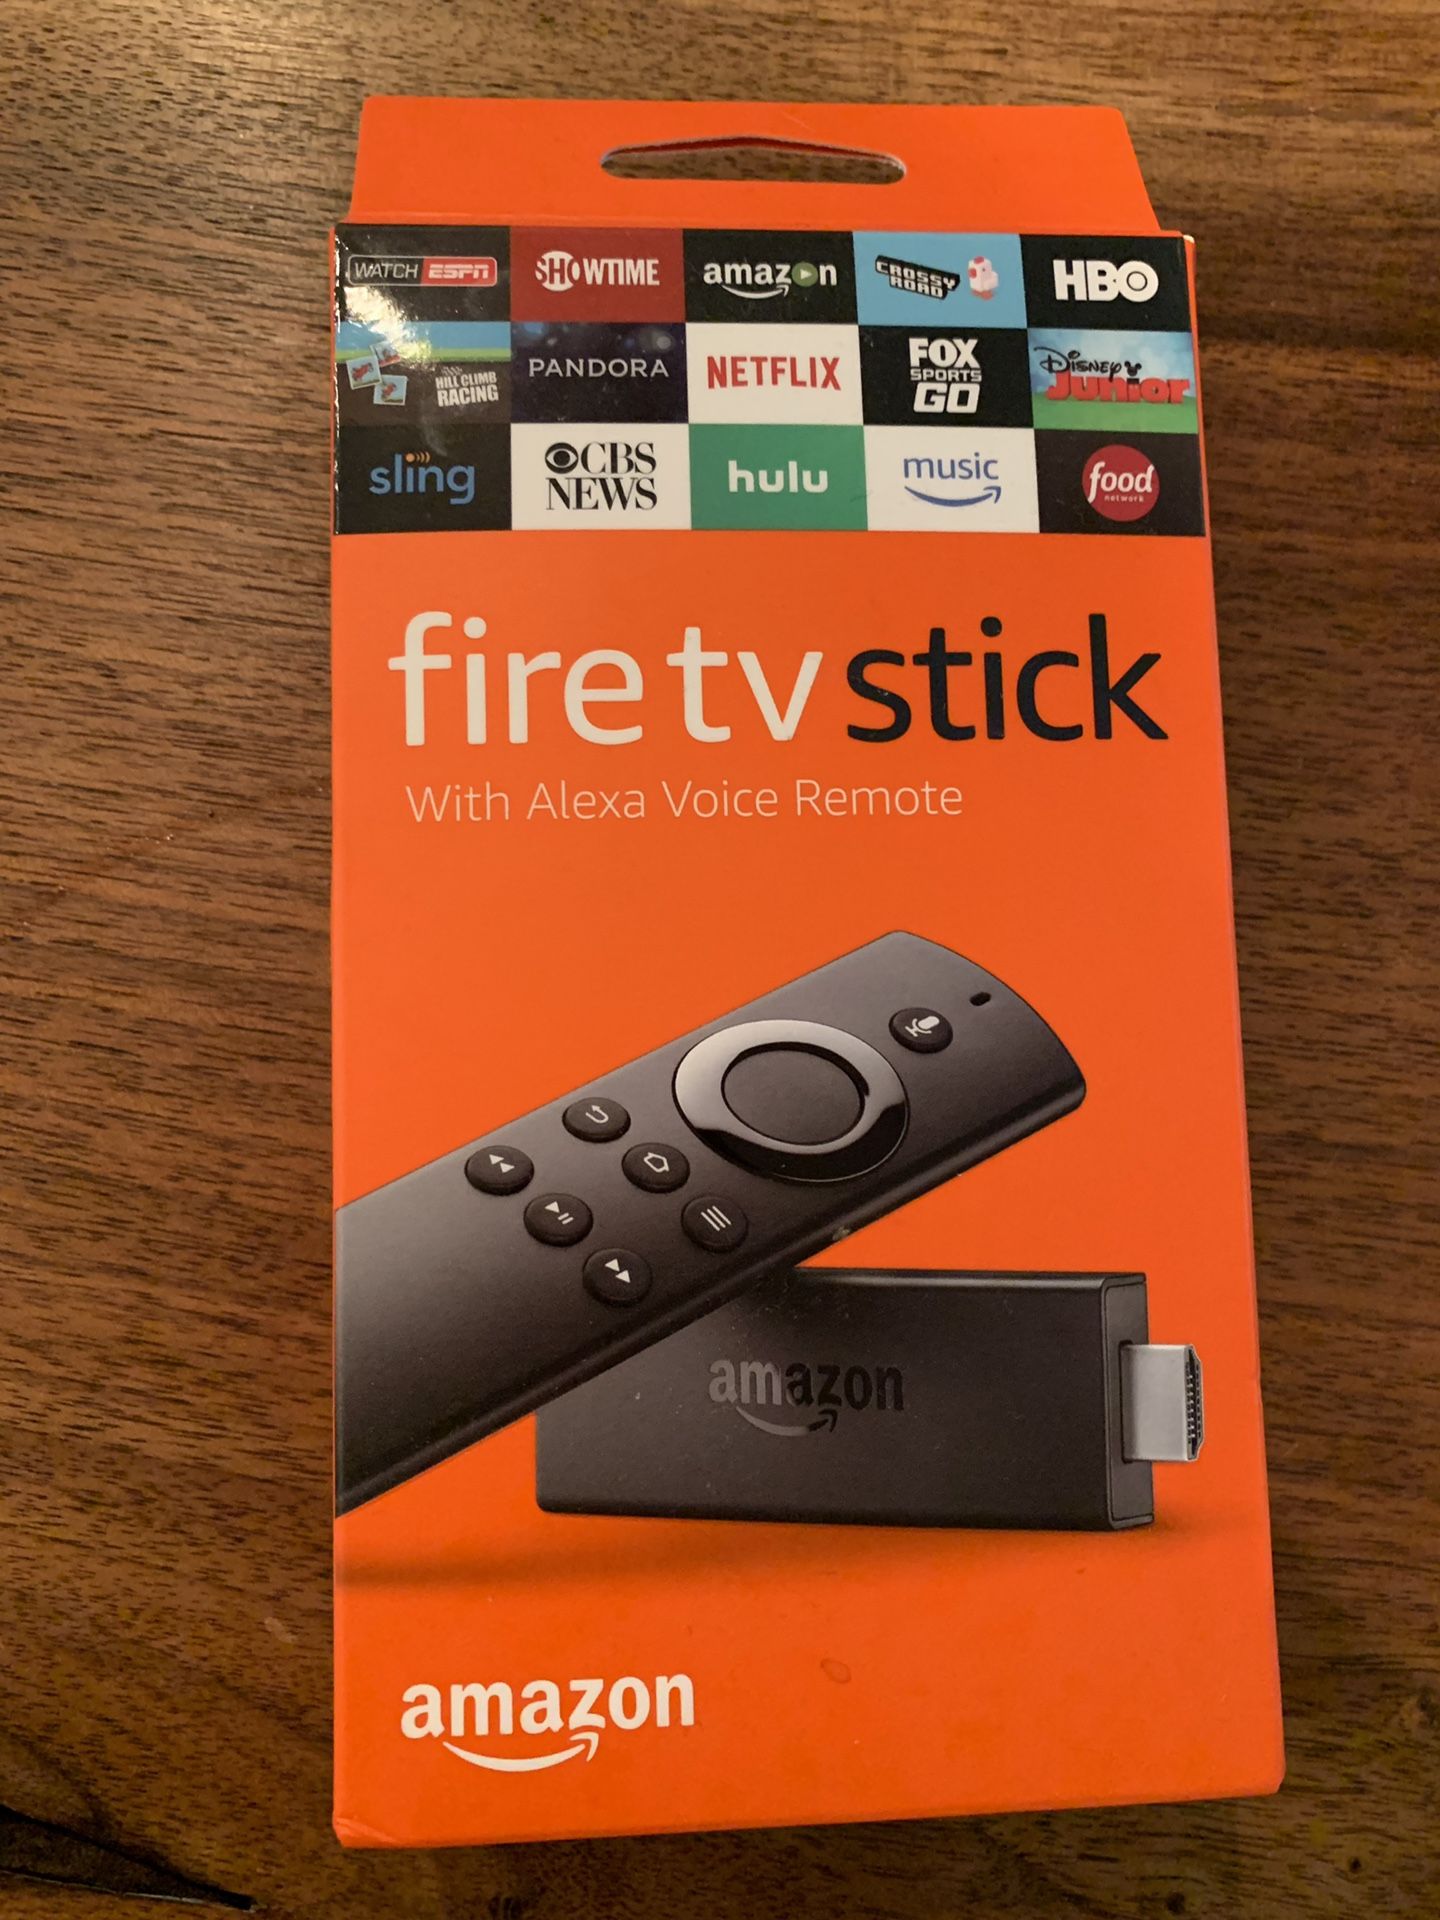 Amazon Fire TV Stick 2nd gen with Alexa Voice Remote, streaming media player